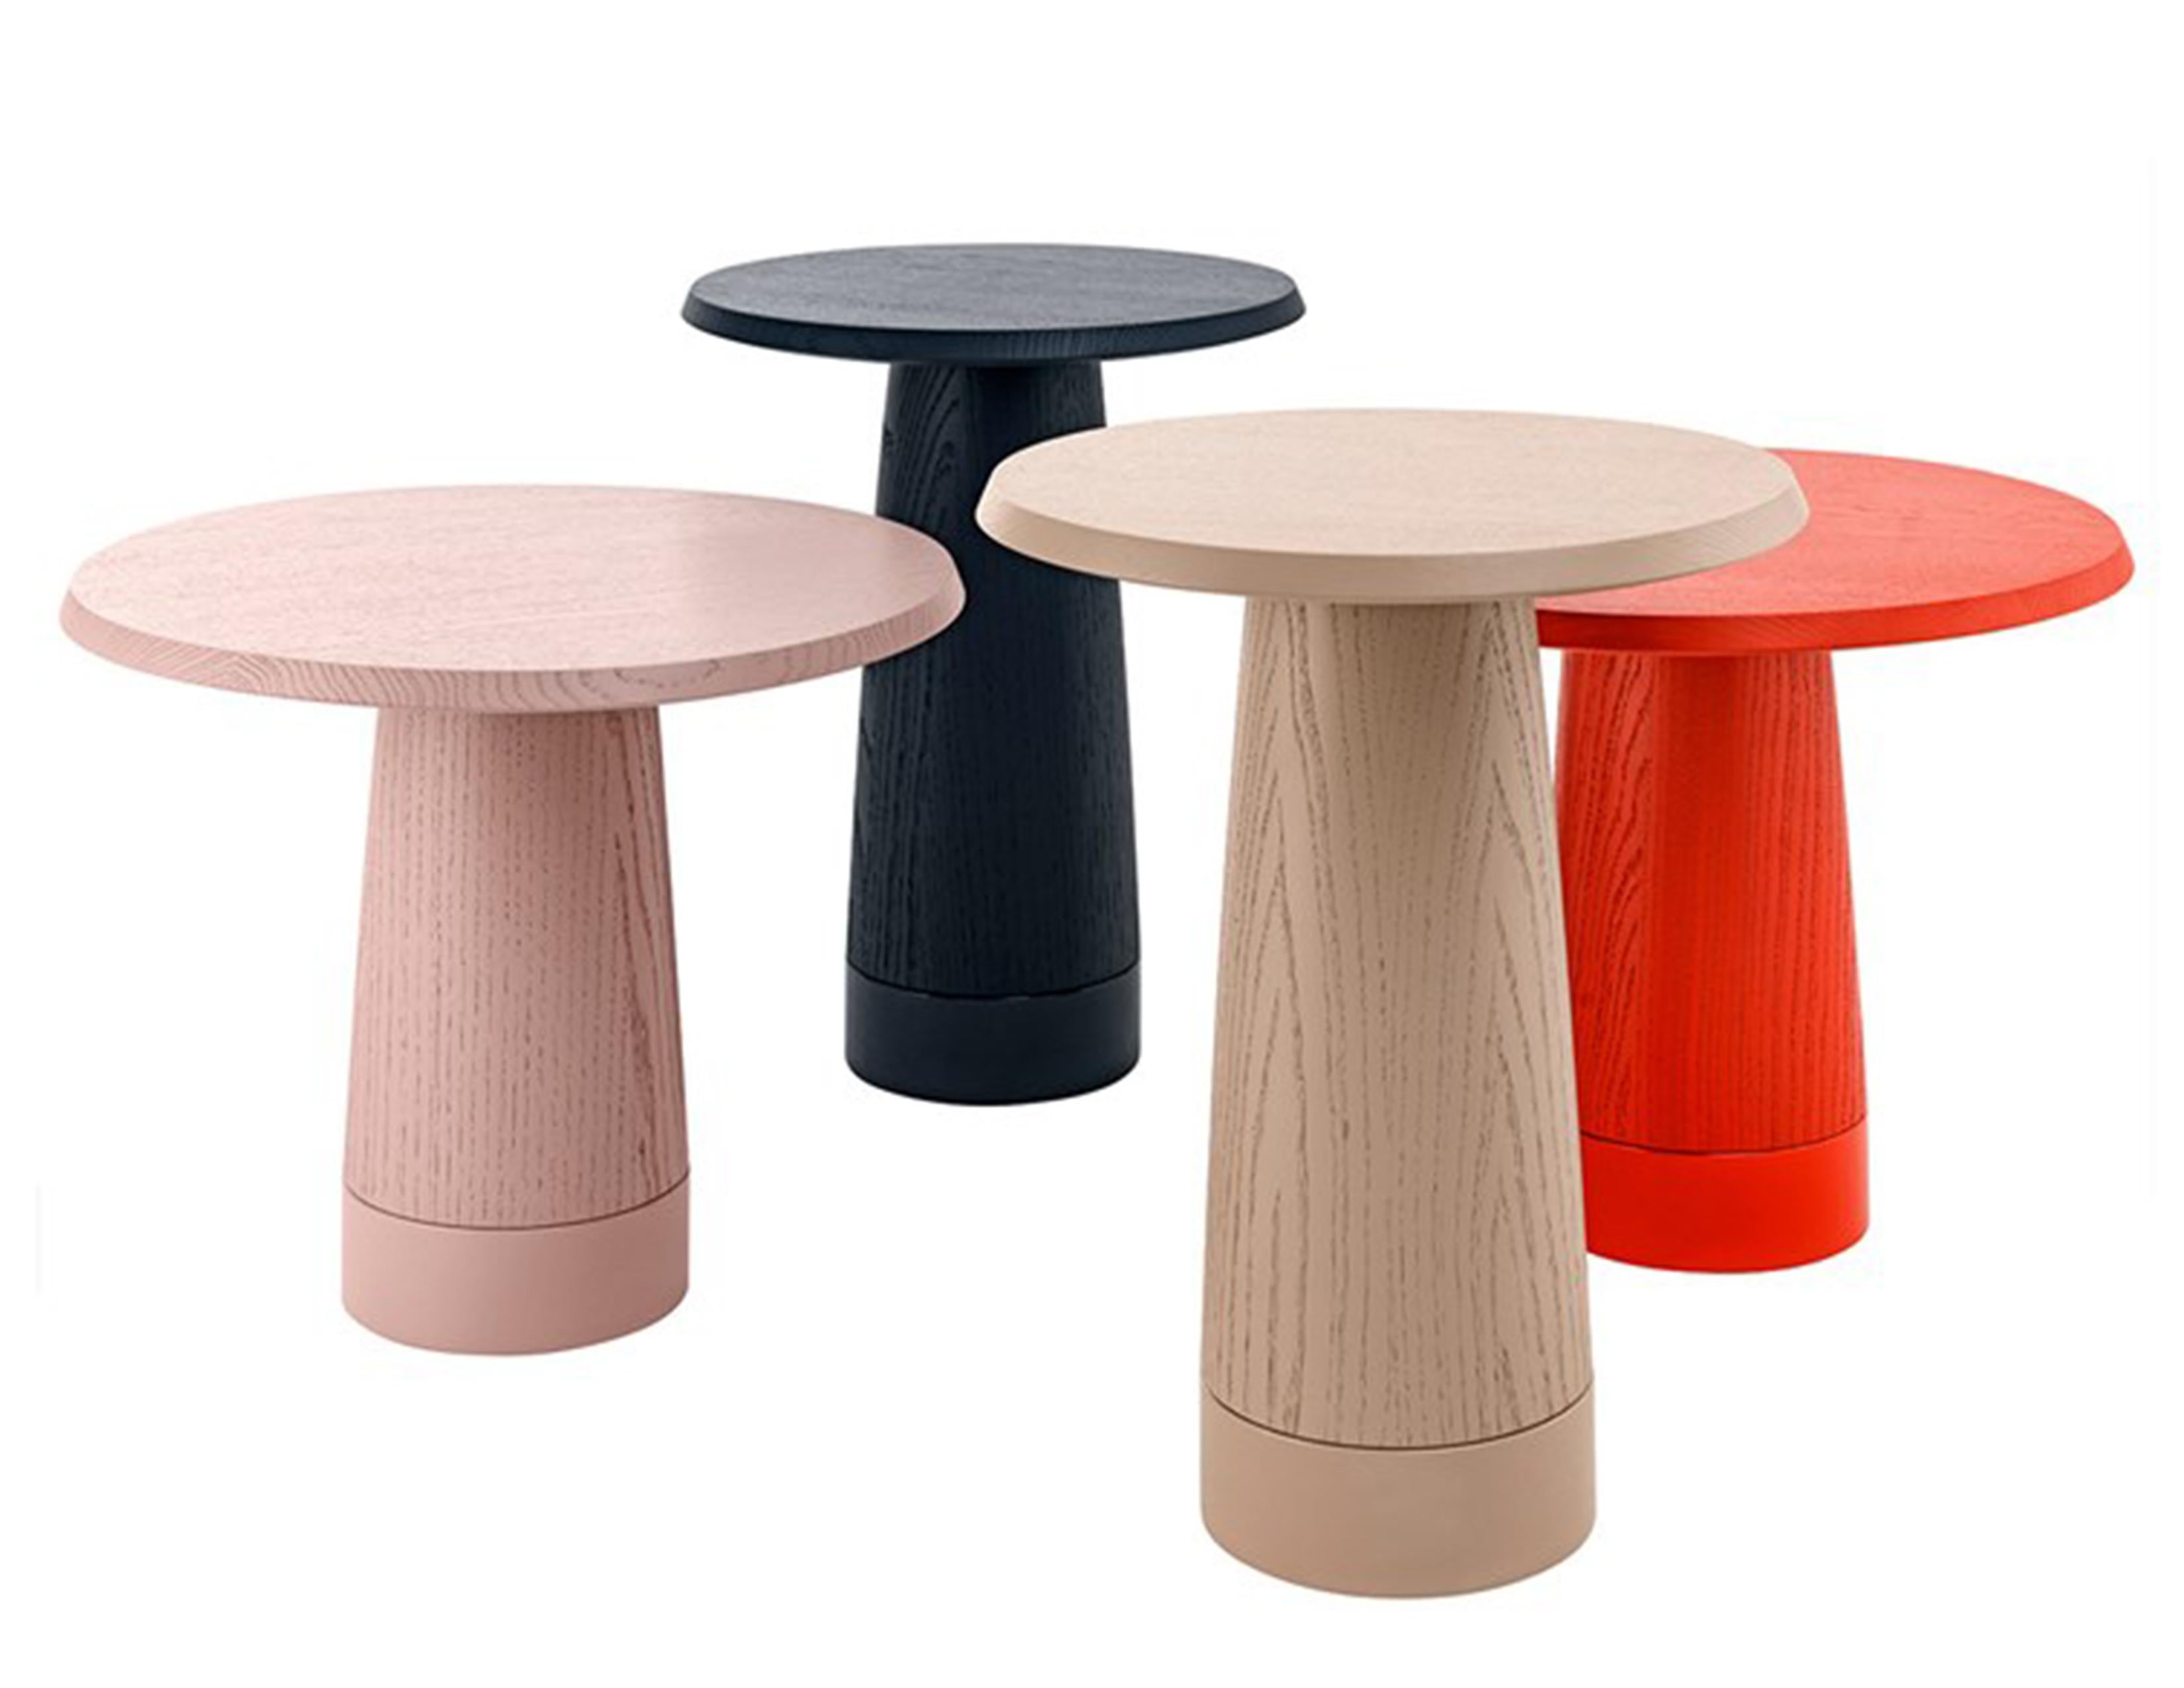 The AMANITA side table combines contemporary clarity with a surprising sense of familiarity. It’s down to the natural elegance of its mushroom -like form. The tabletop and the upper section of the foot are both made of solid wood, with an open-pore,